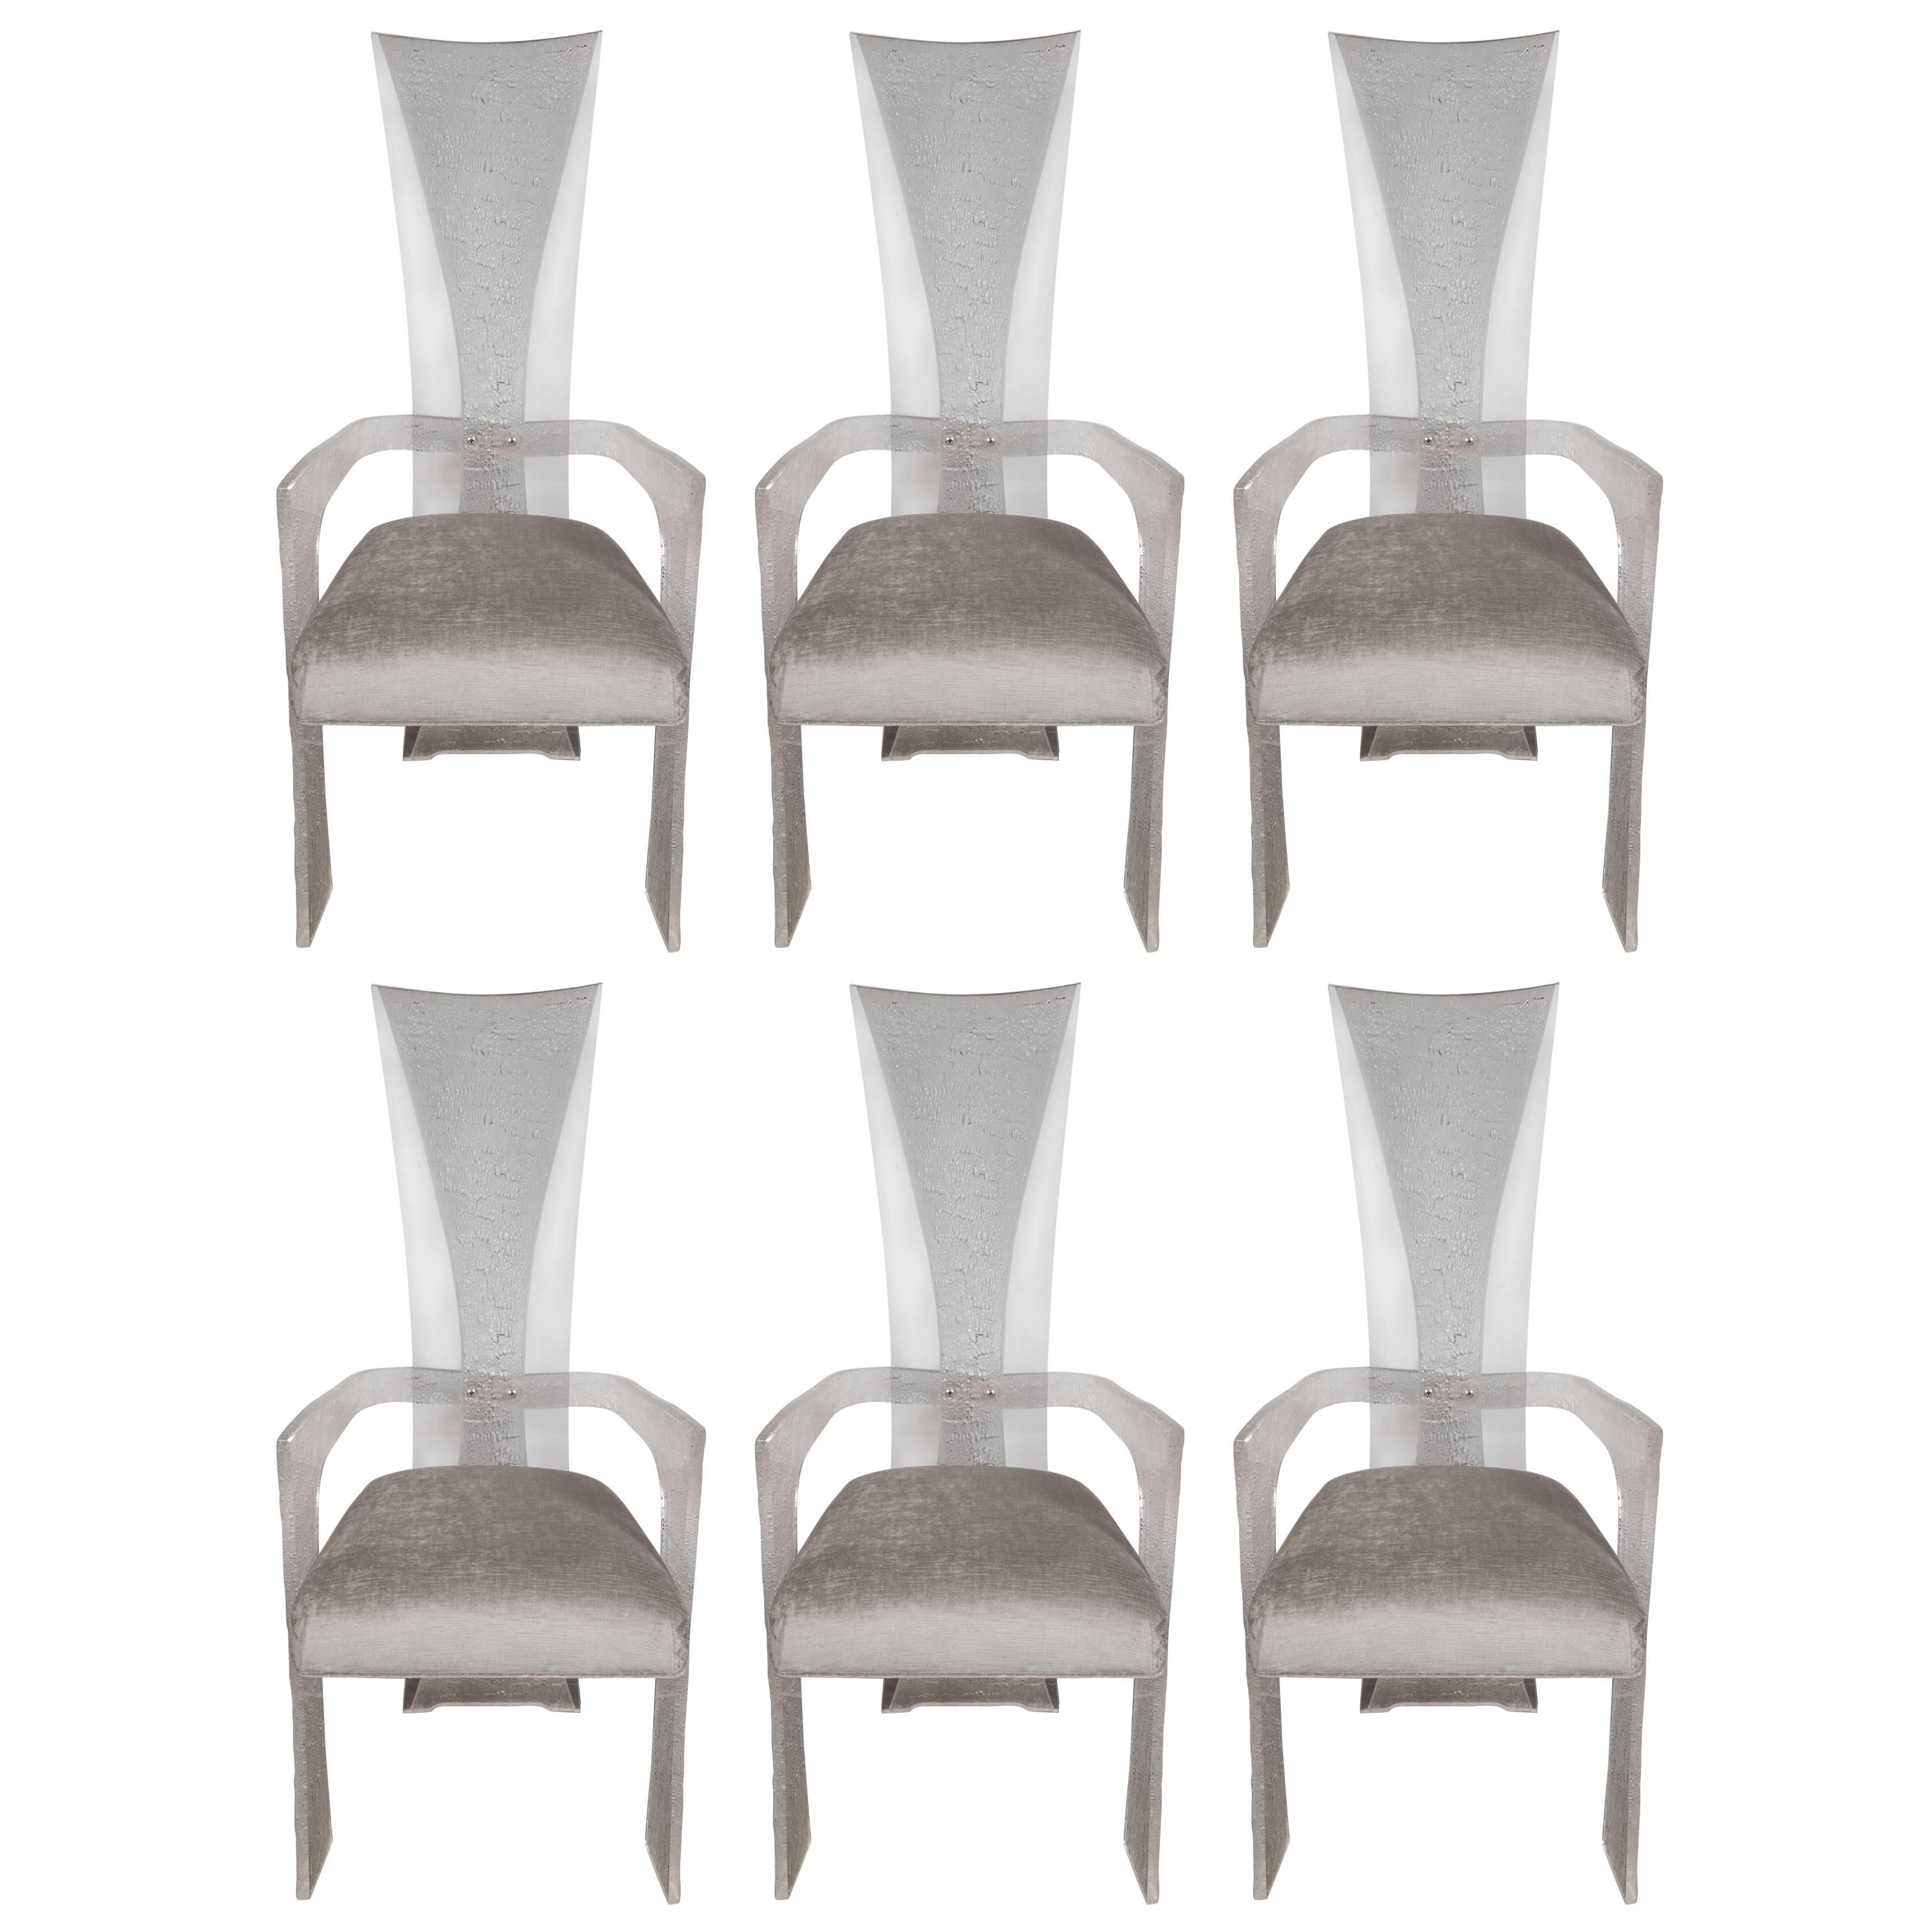 Set of Six Mid-Century Dining Chairs in Lucite and Smoked Platinum Upholstery